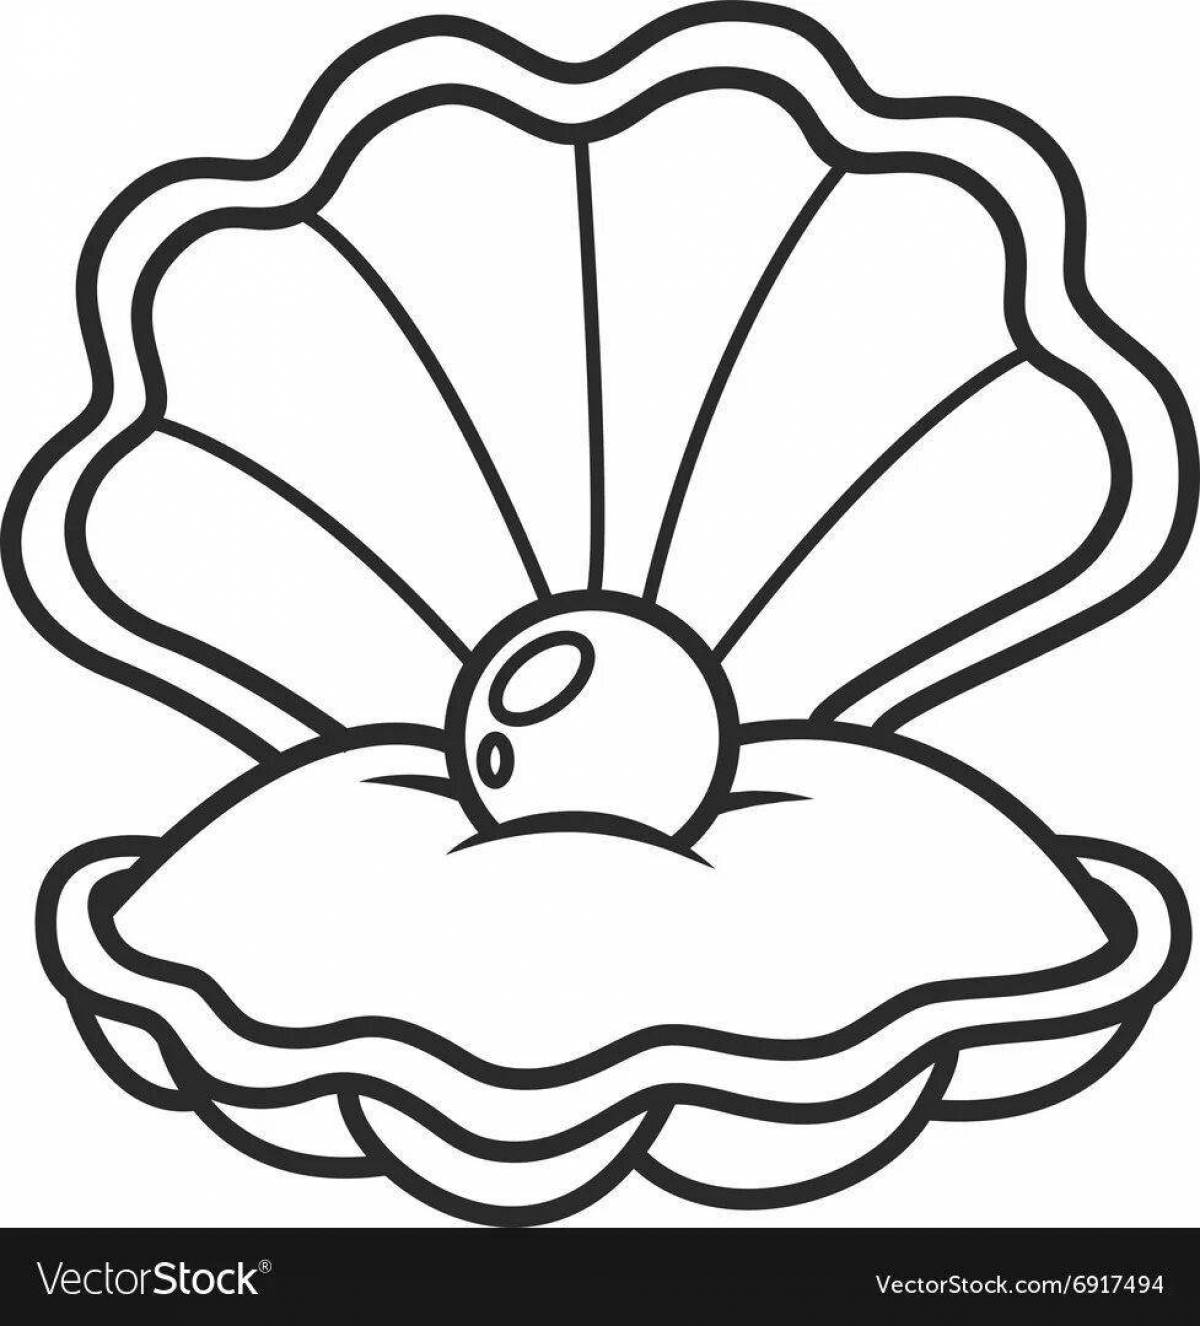 Awesome shell coloring pages for kids